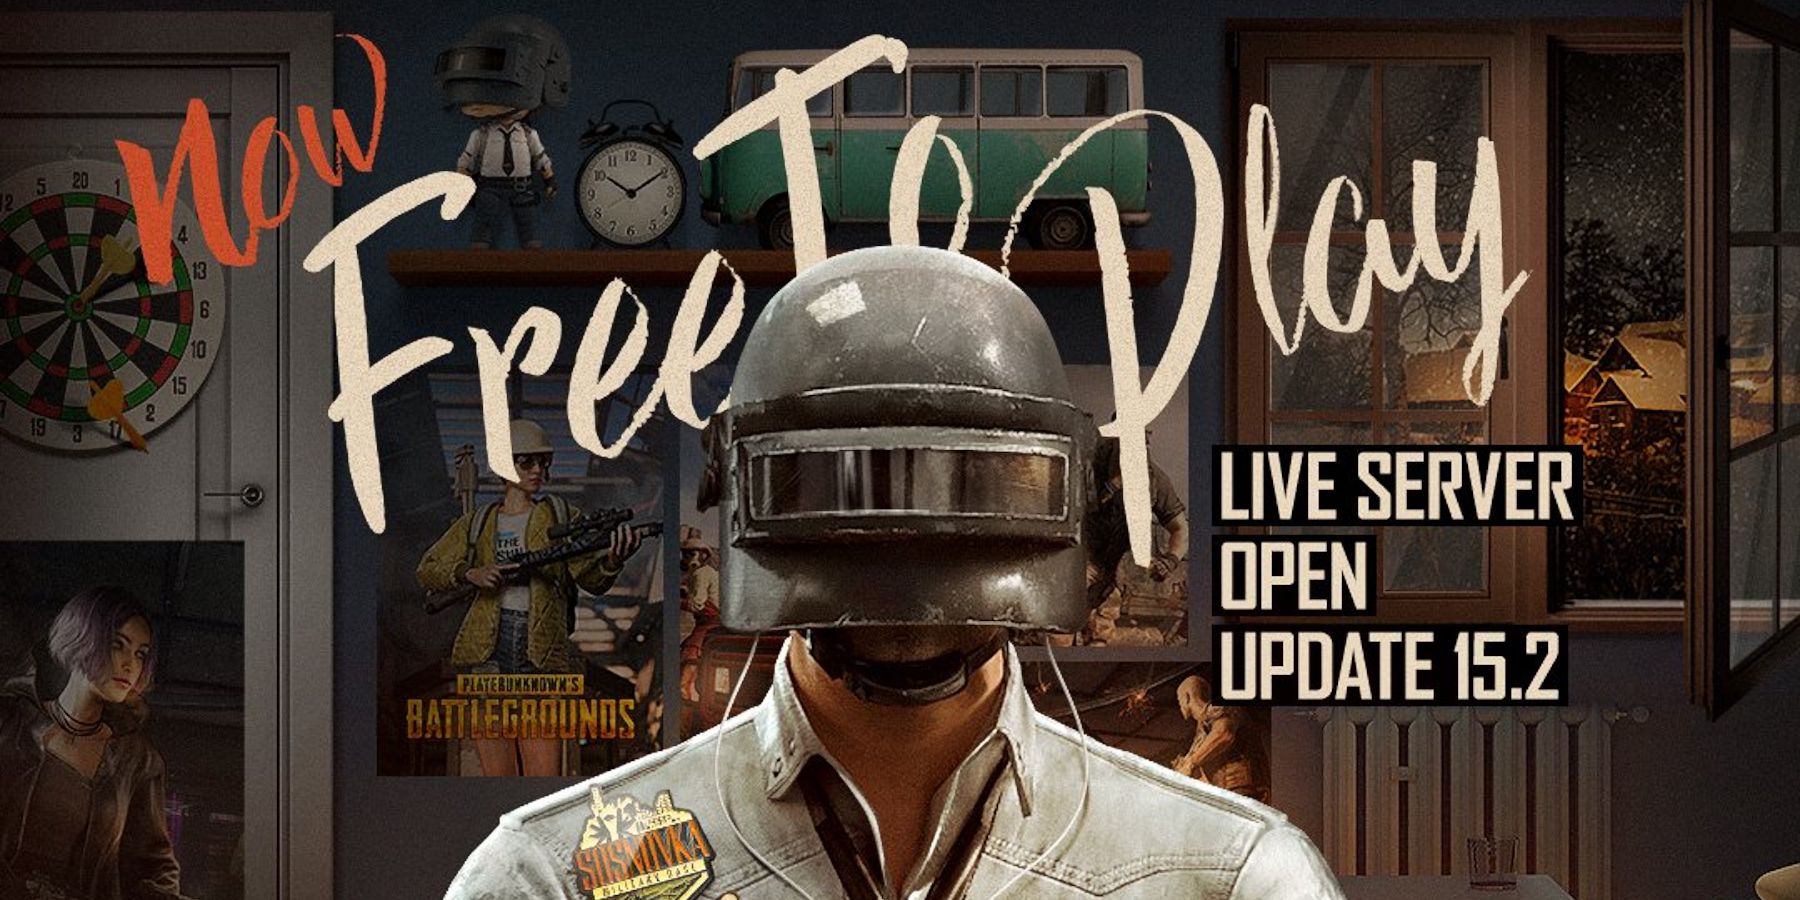 pubg now free to play update 15.2